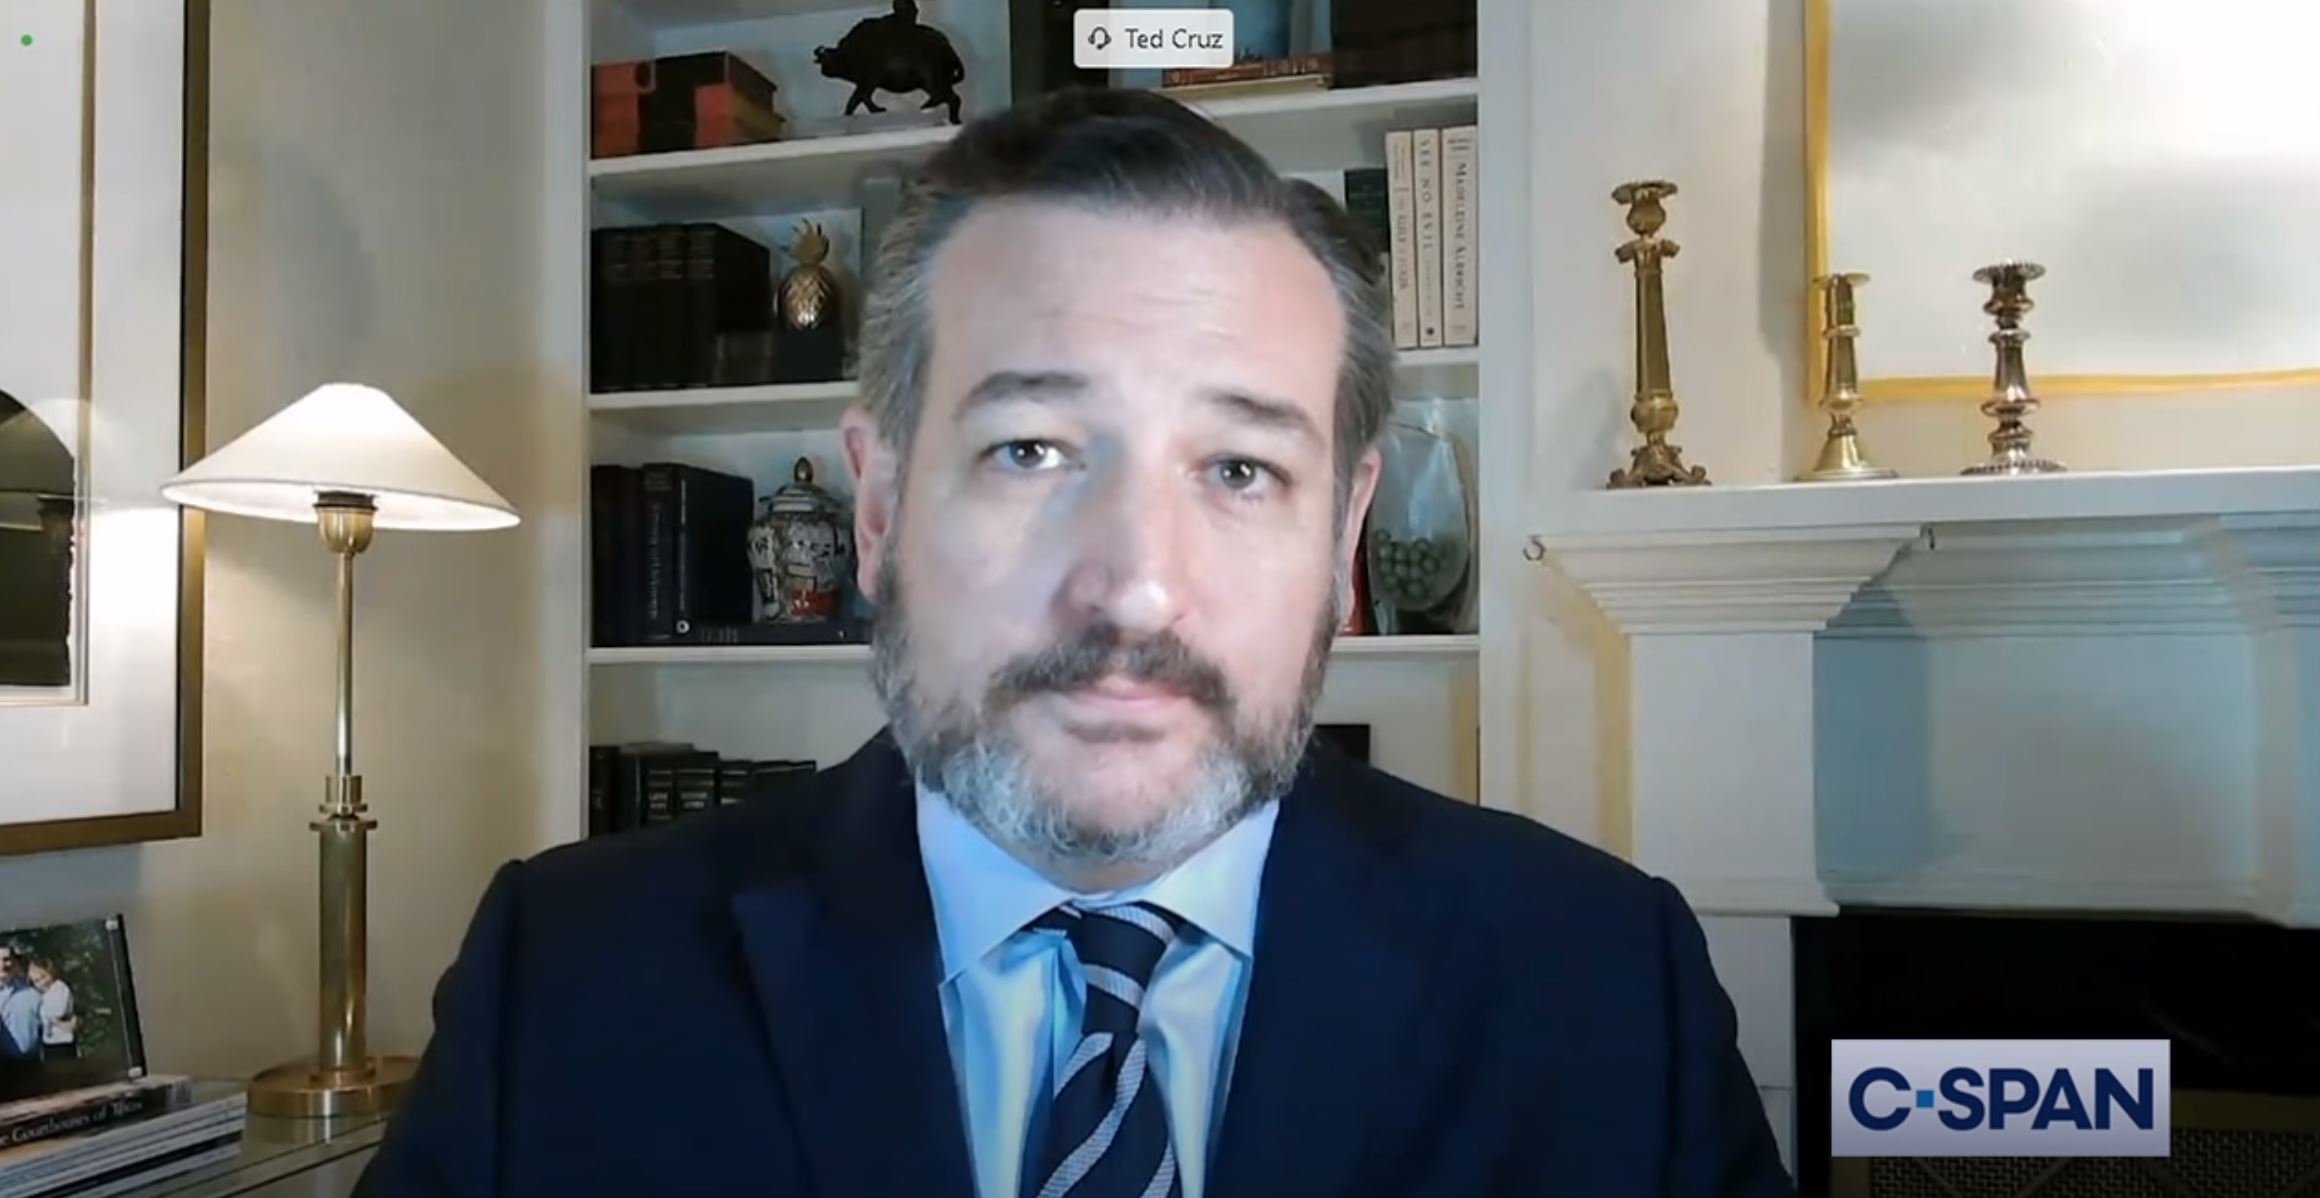 WATCH: Ted Cruz to Twitter CEO - 'Mr. Dorsey, who the hell elected you...?'